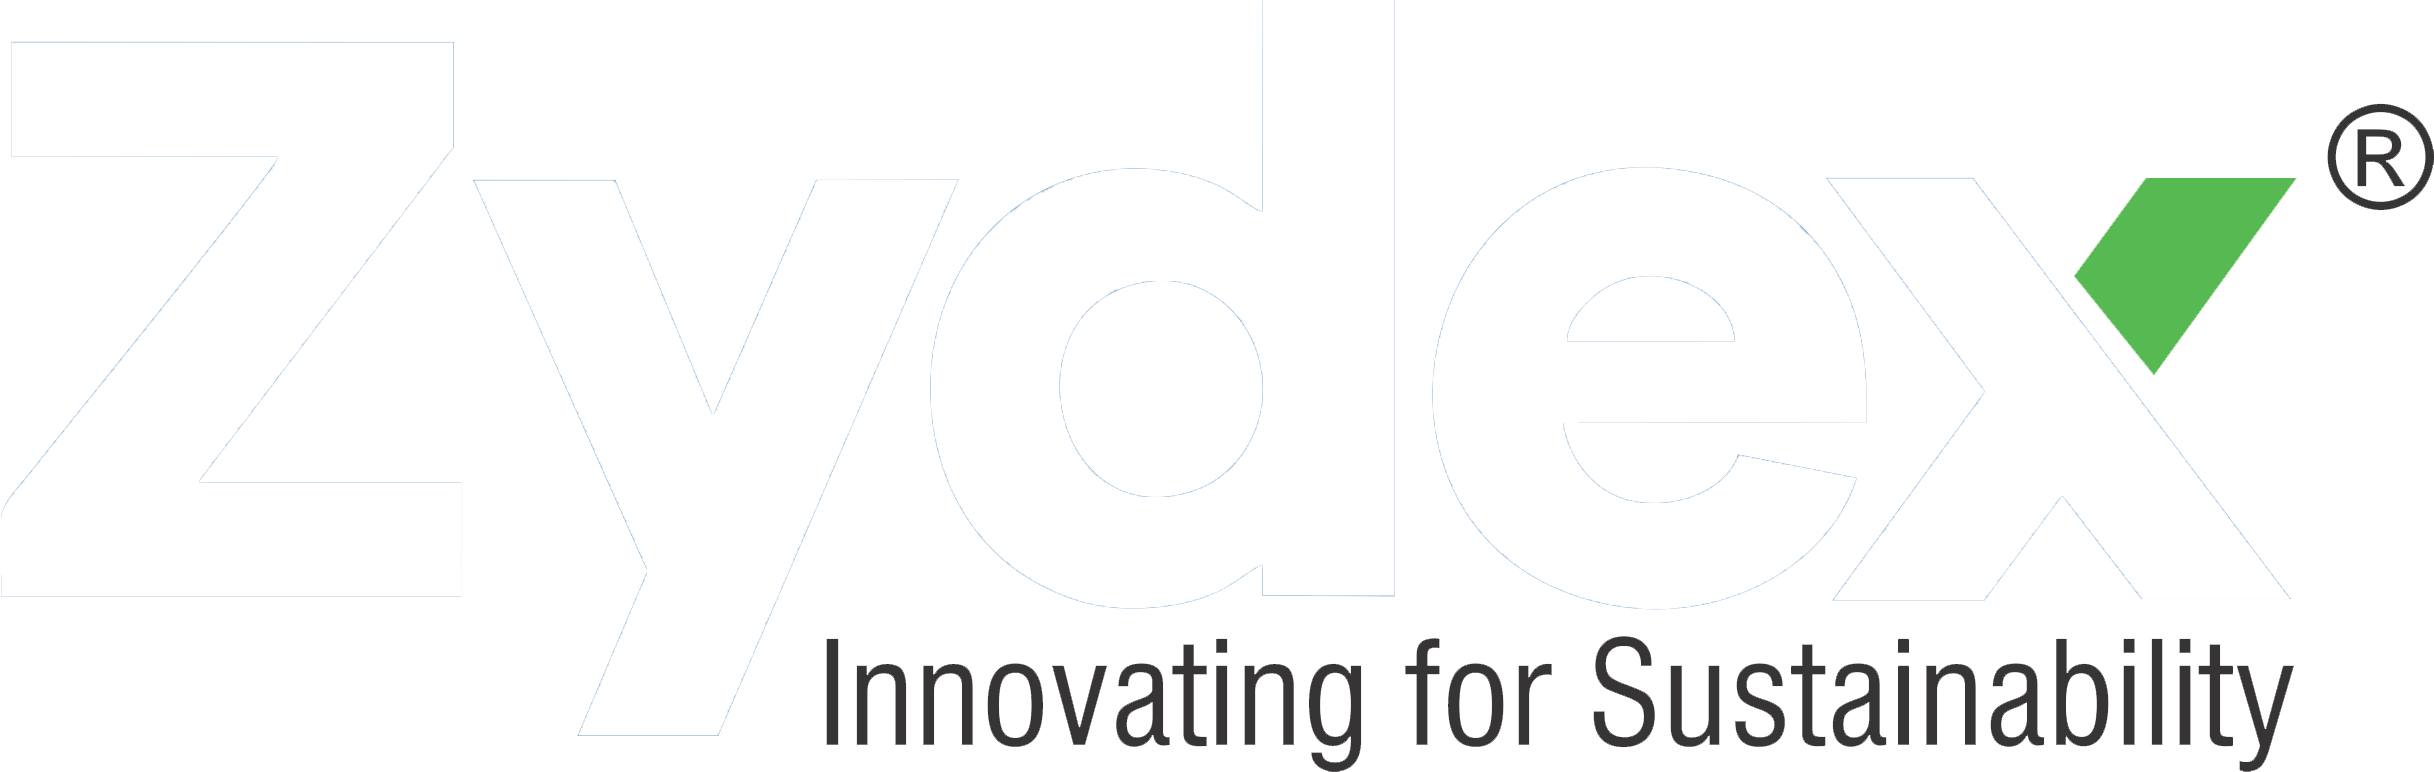 Zydex Group – Specialty Chemicals Company